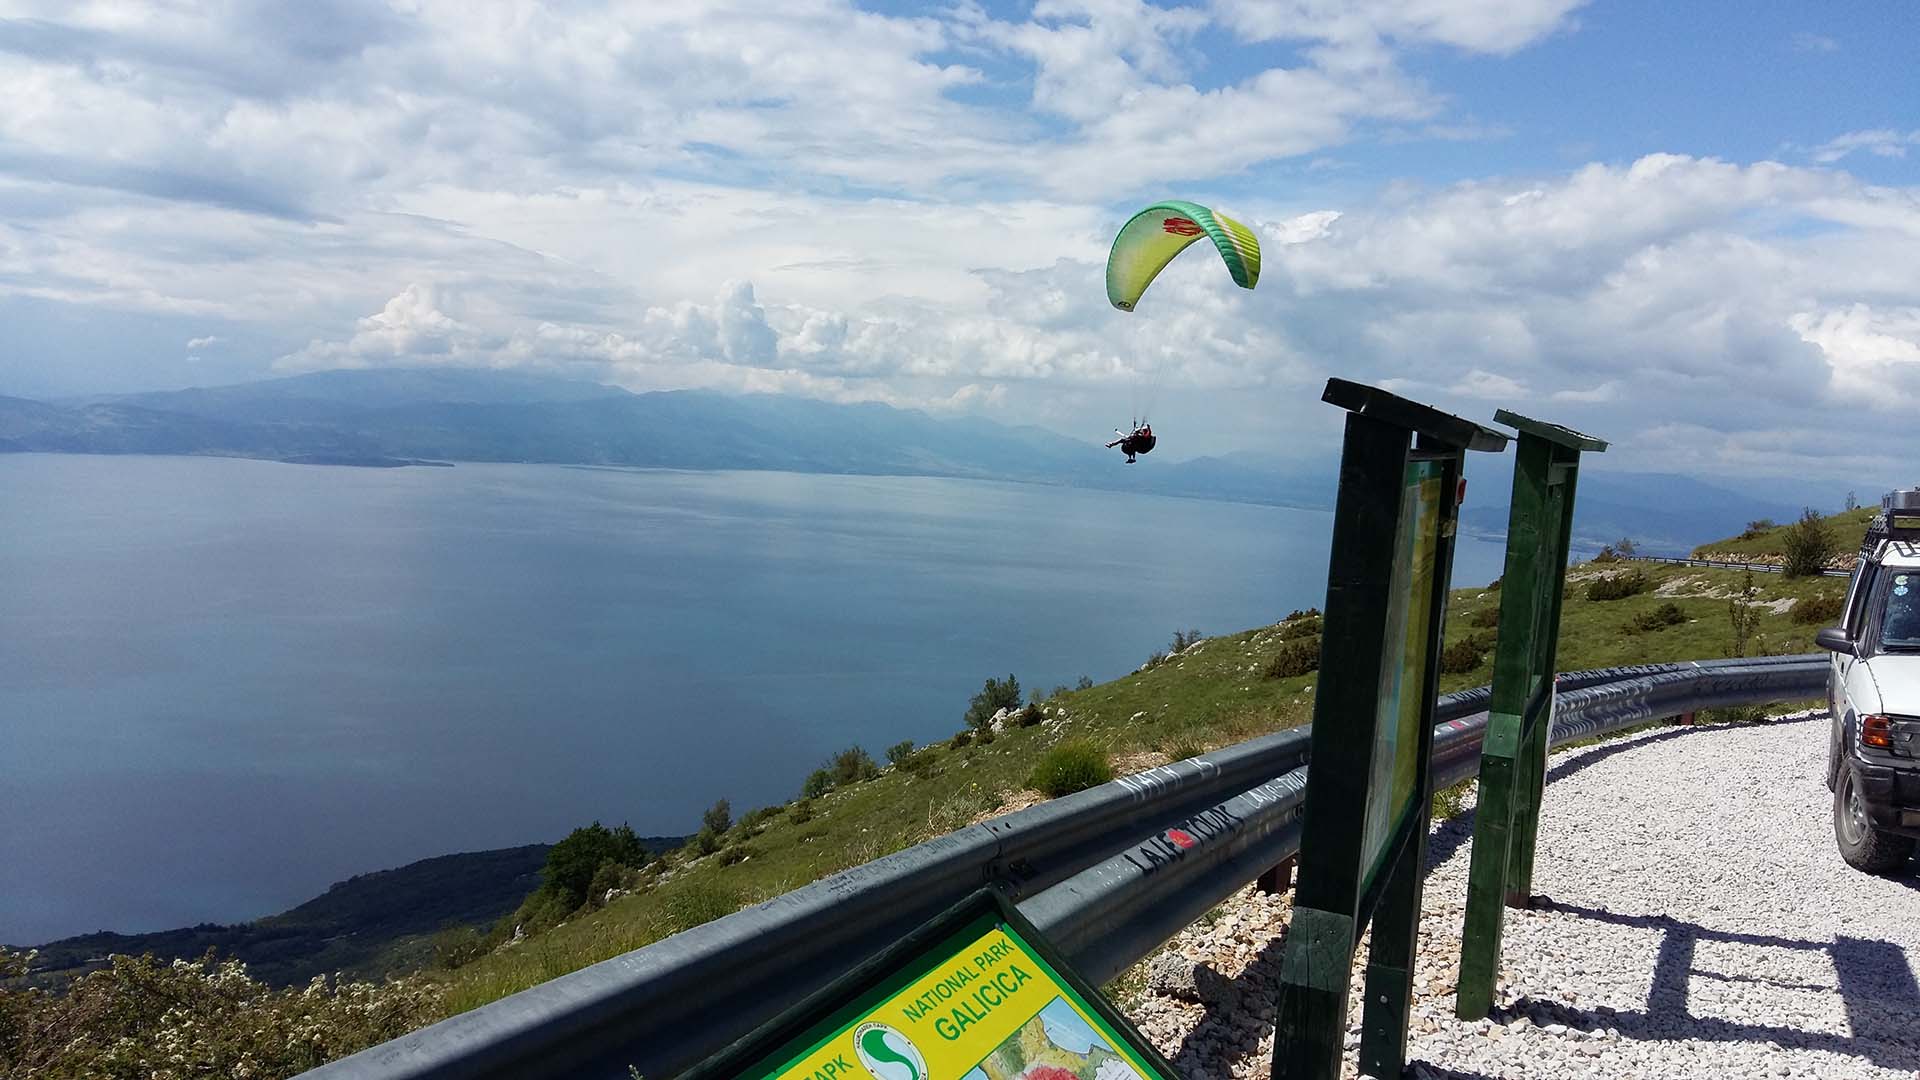 Paragliding above Galicica National Park and Ohrid Lake